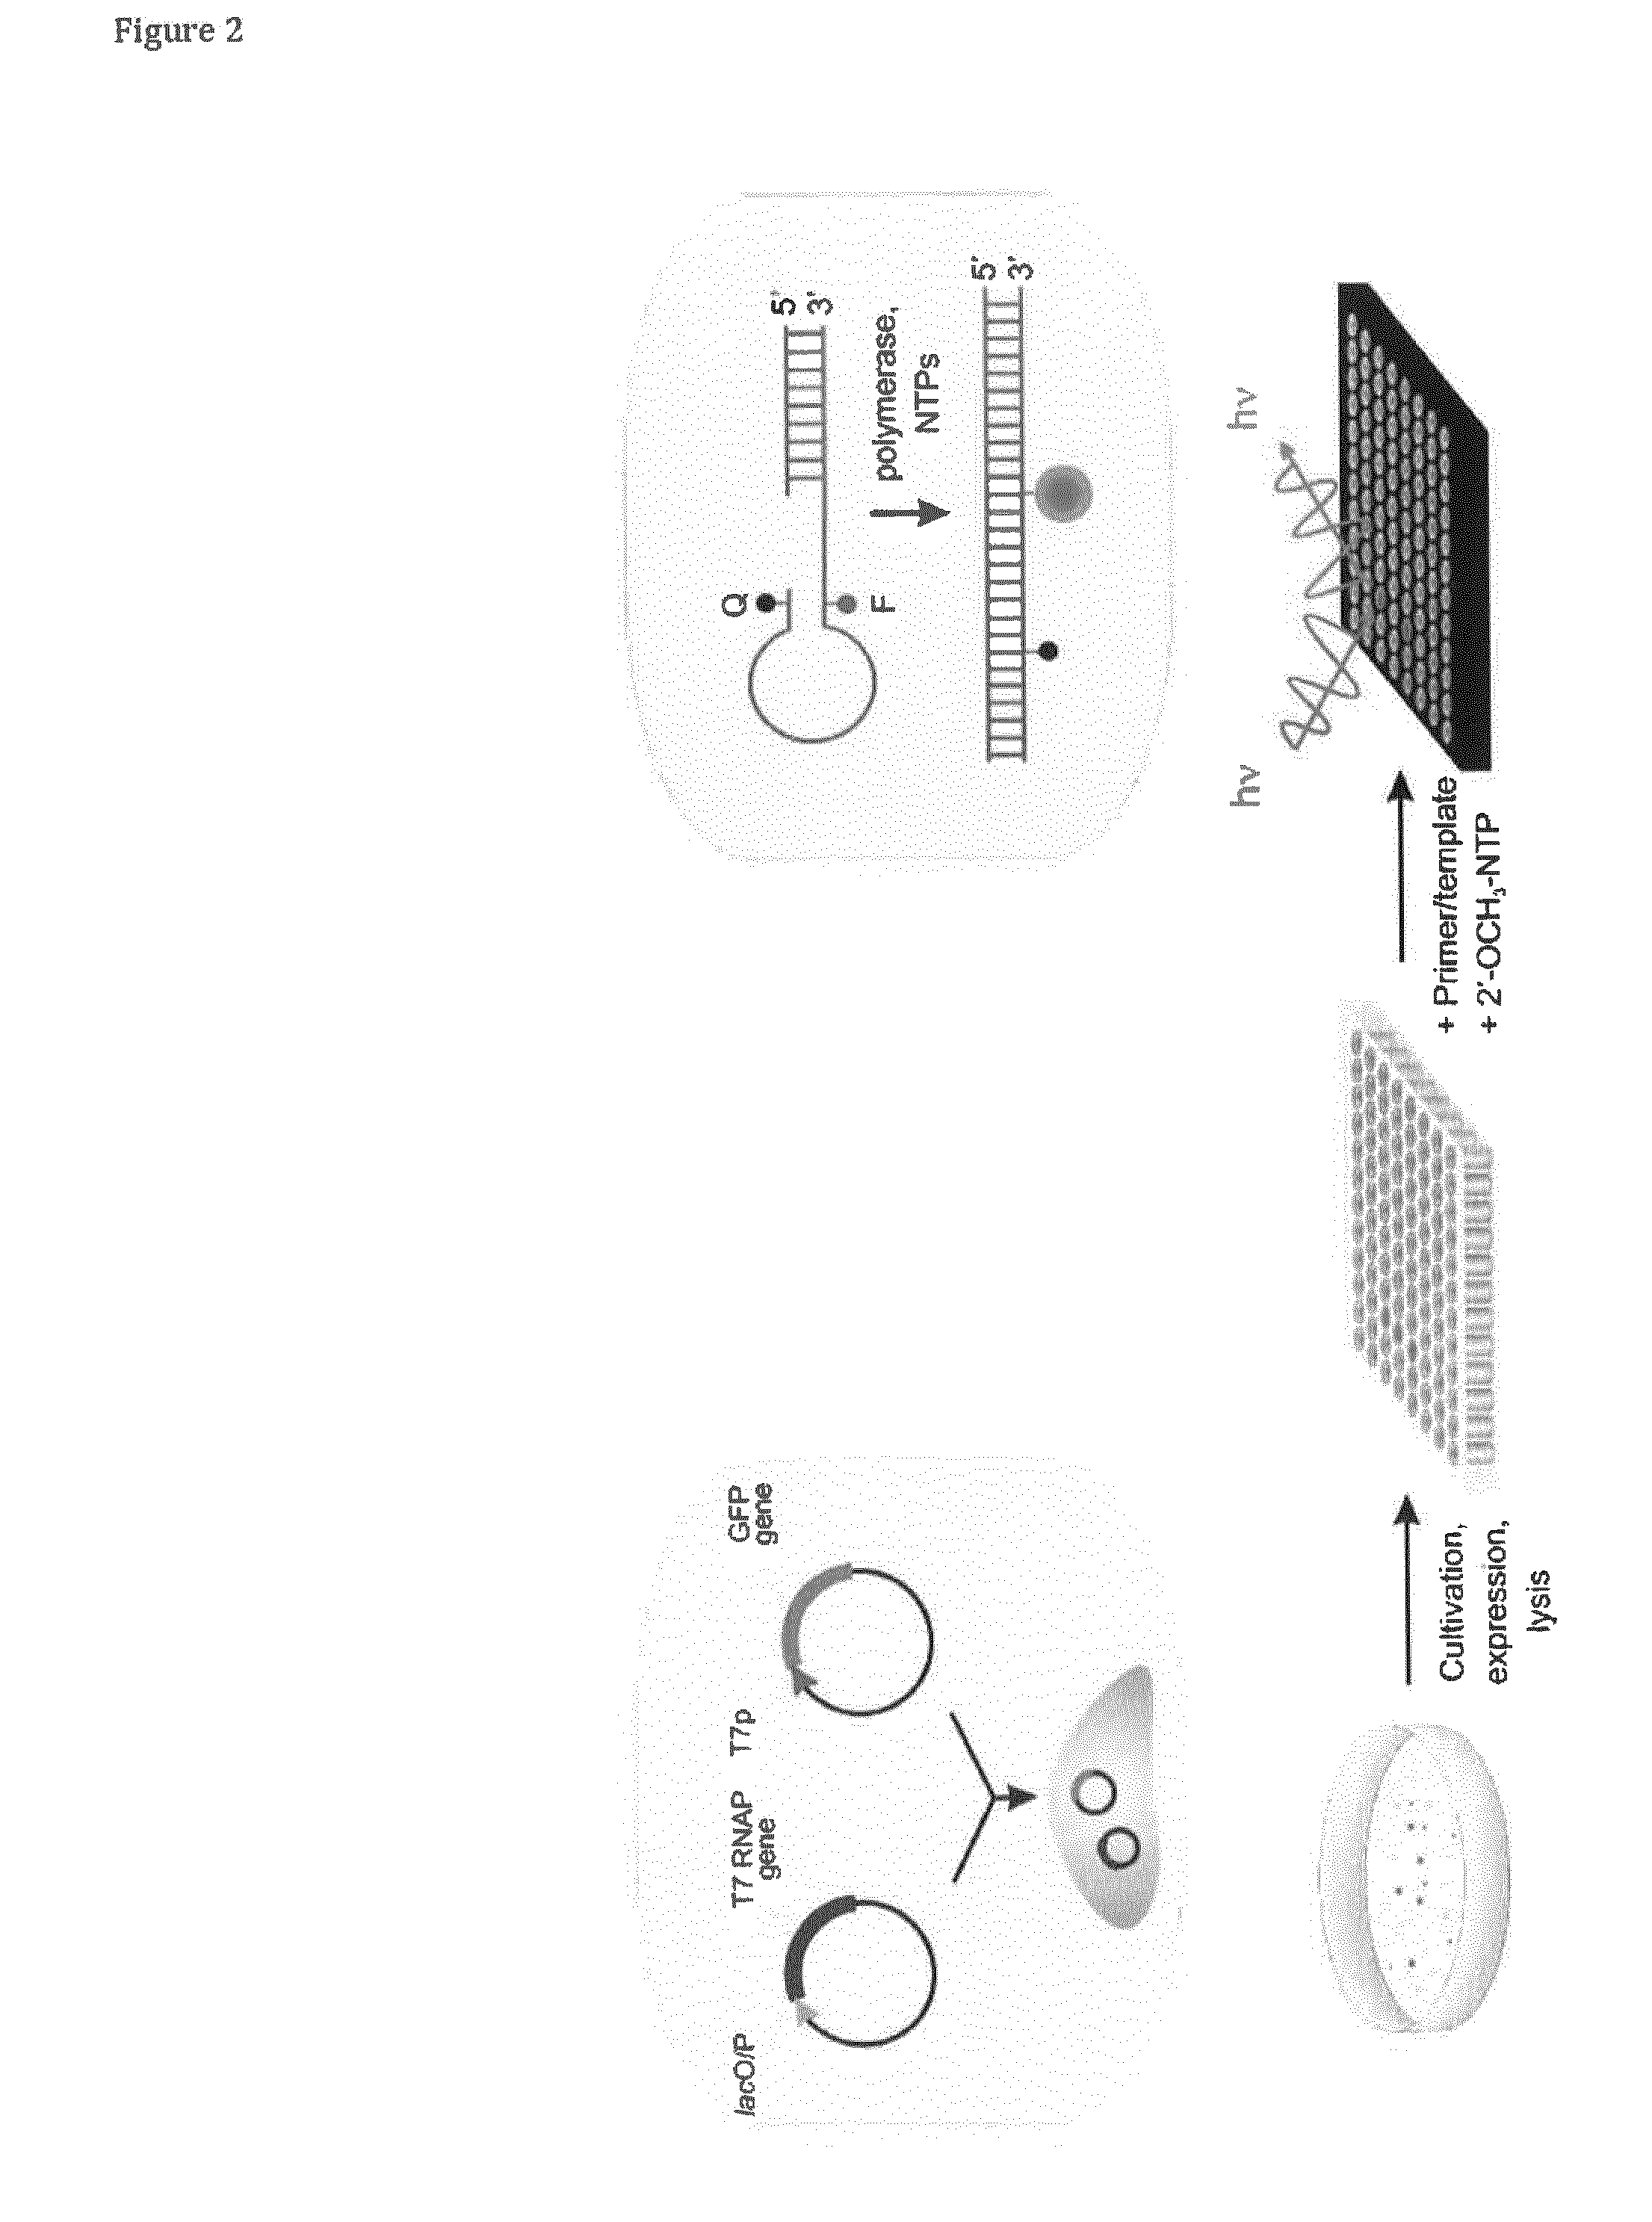 T7 RNA polymerase variants and methods of using the same